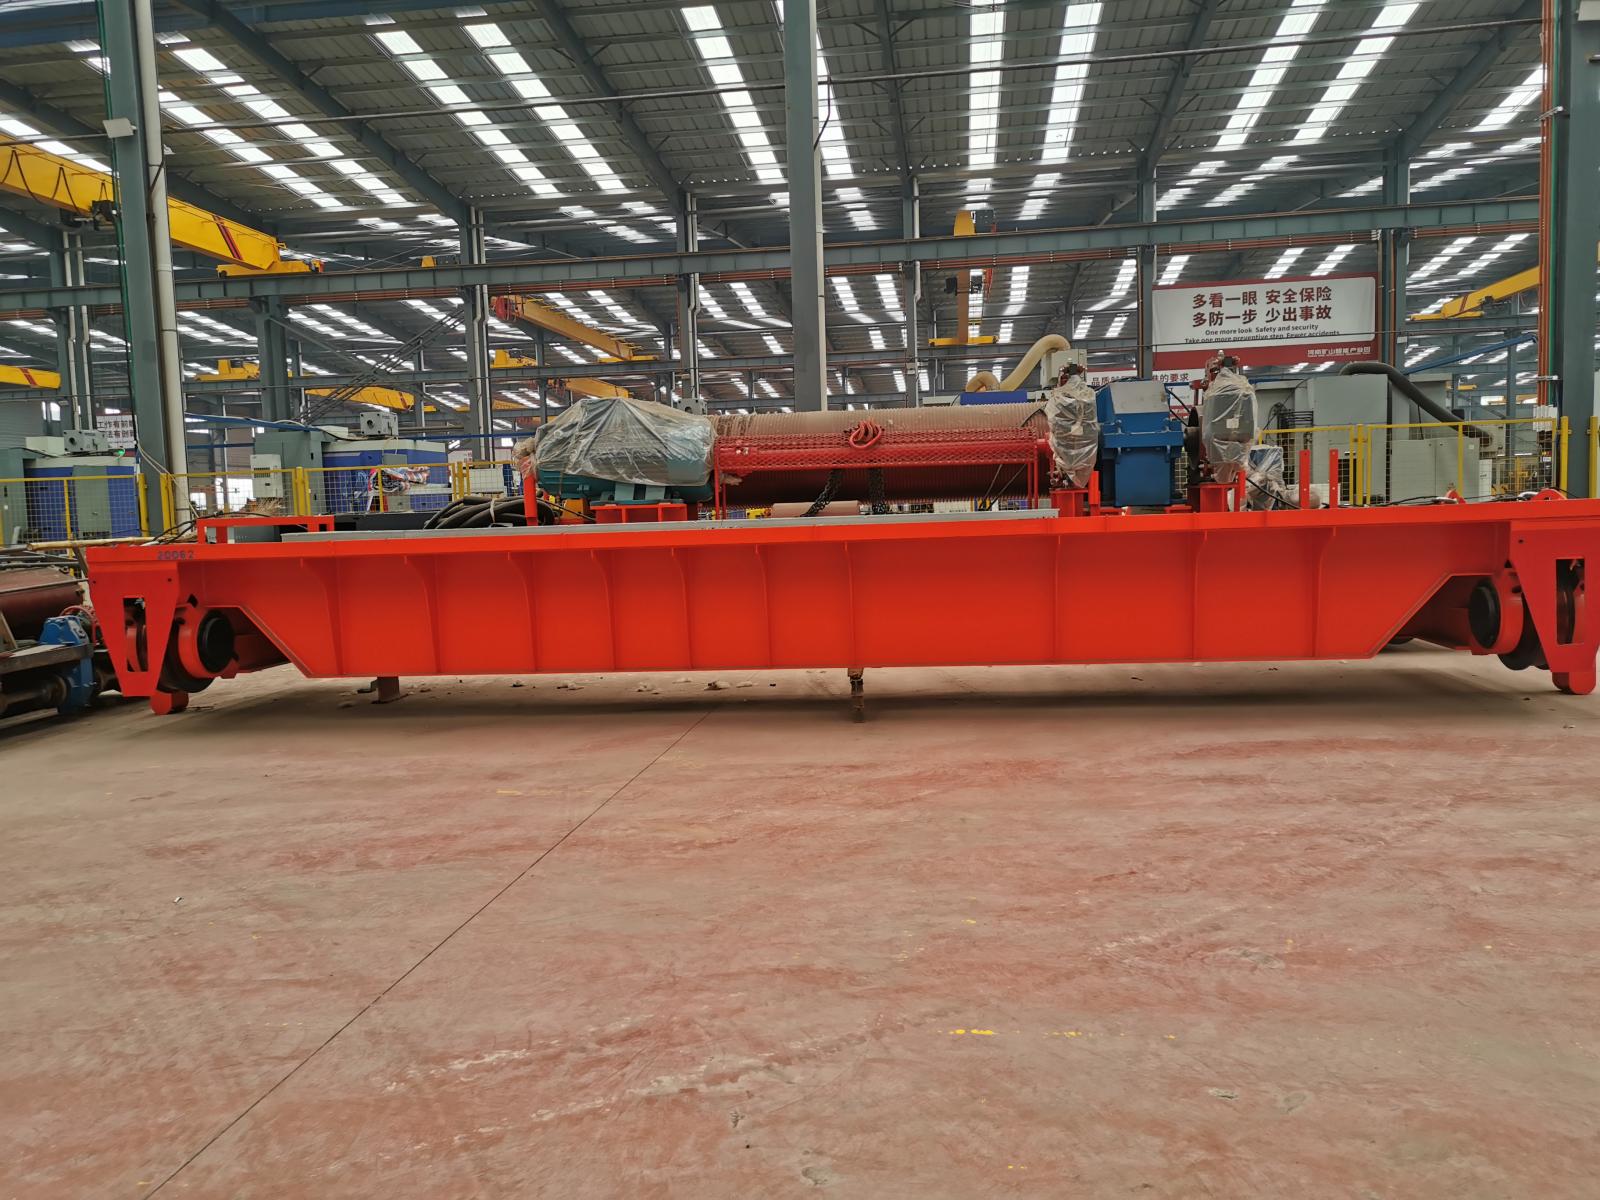 Big Order for overhead crane from the Indian Plant